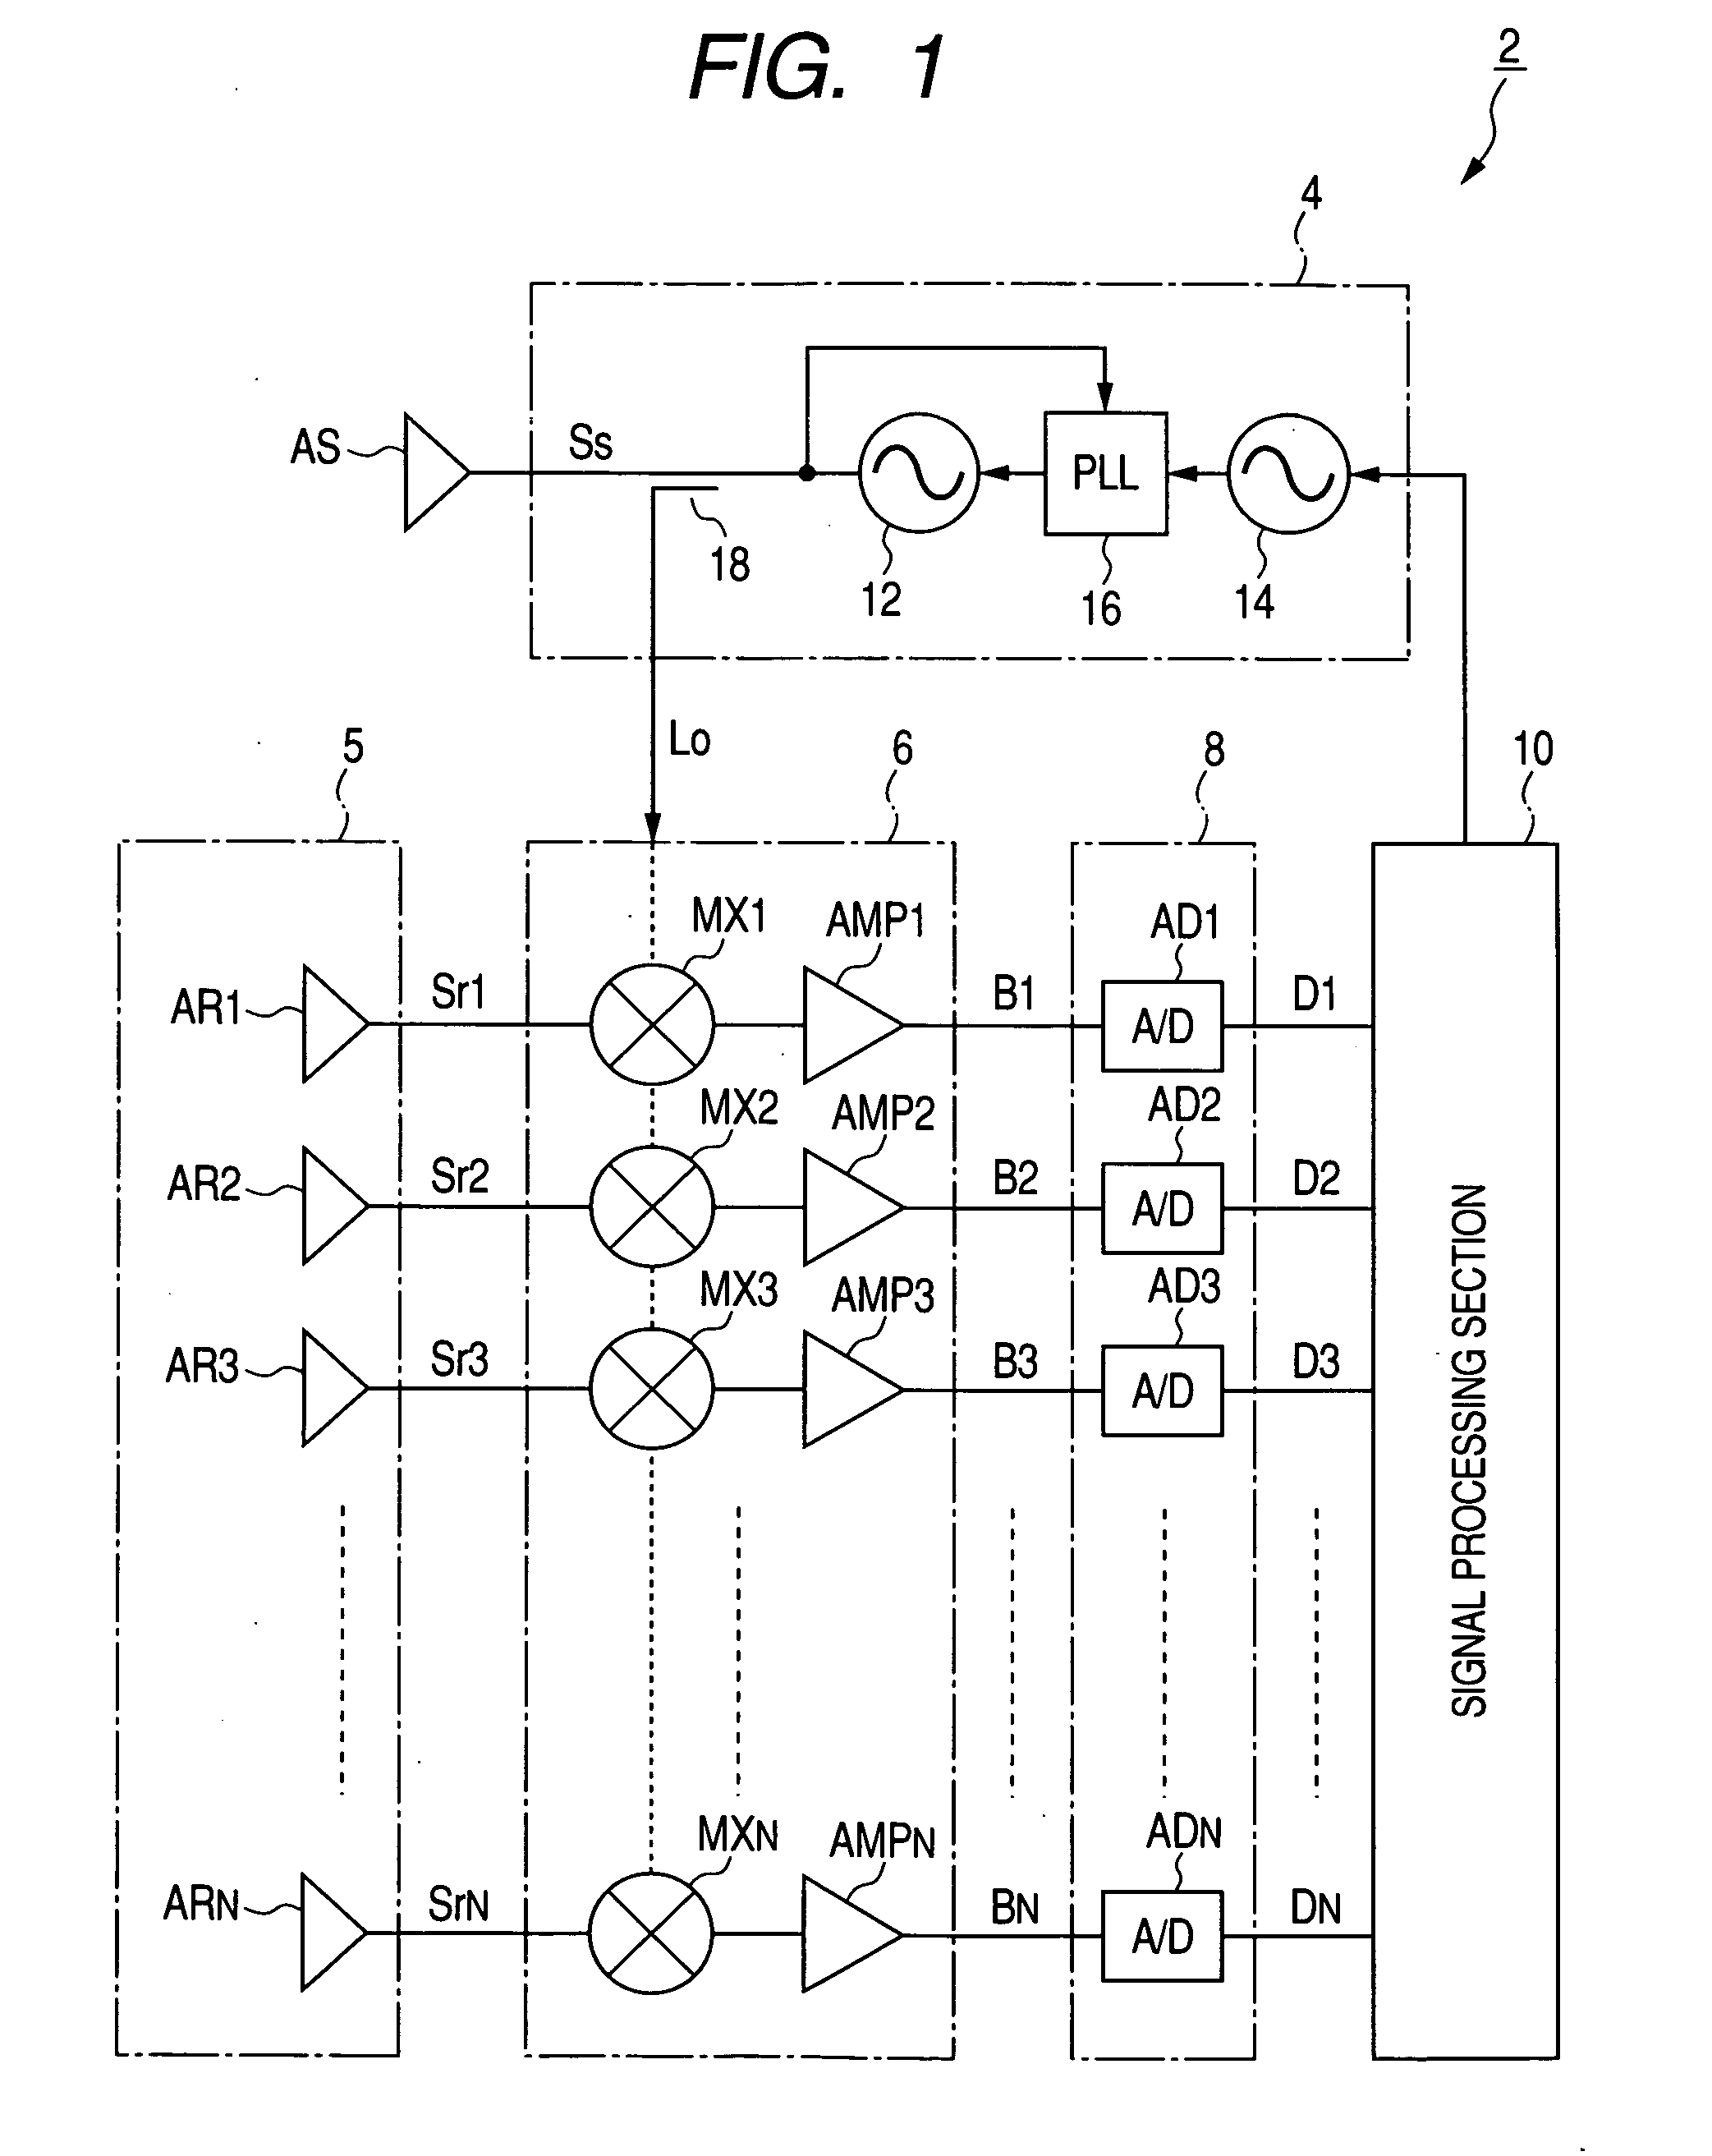 Target object detection apparatus for acquiring information concerning target objects based on correlation matrix derived from signal values corresponding to reflected electromagnetic waves